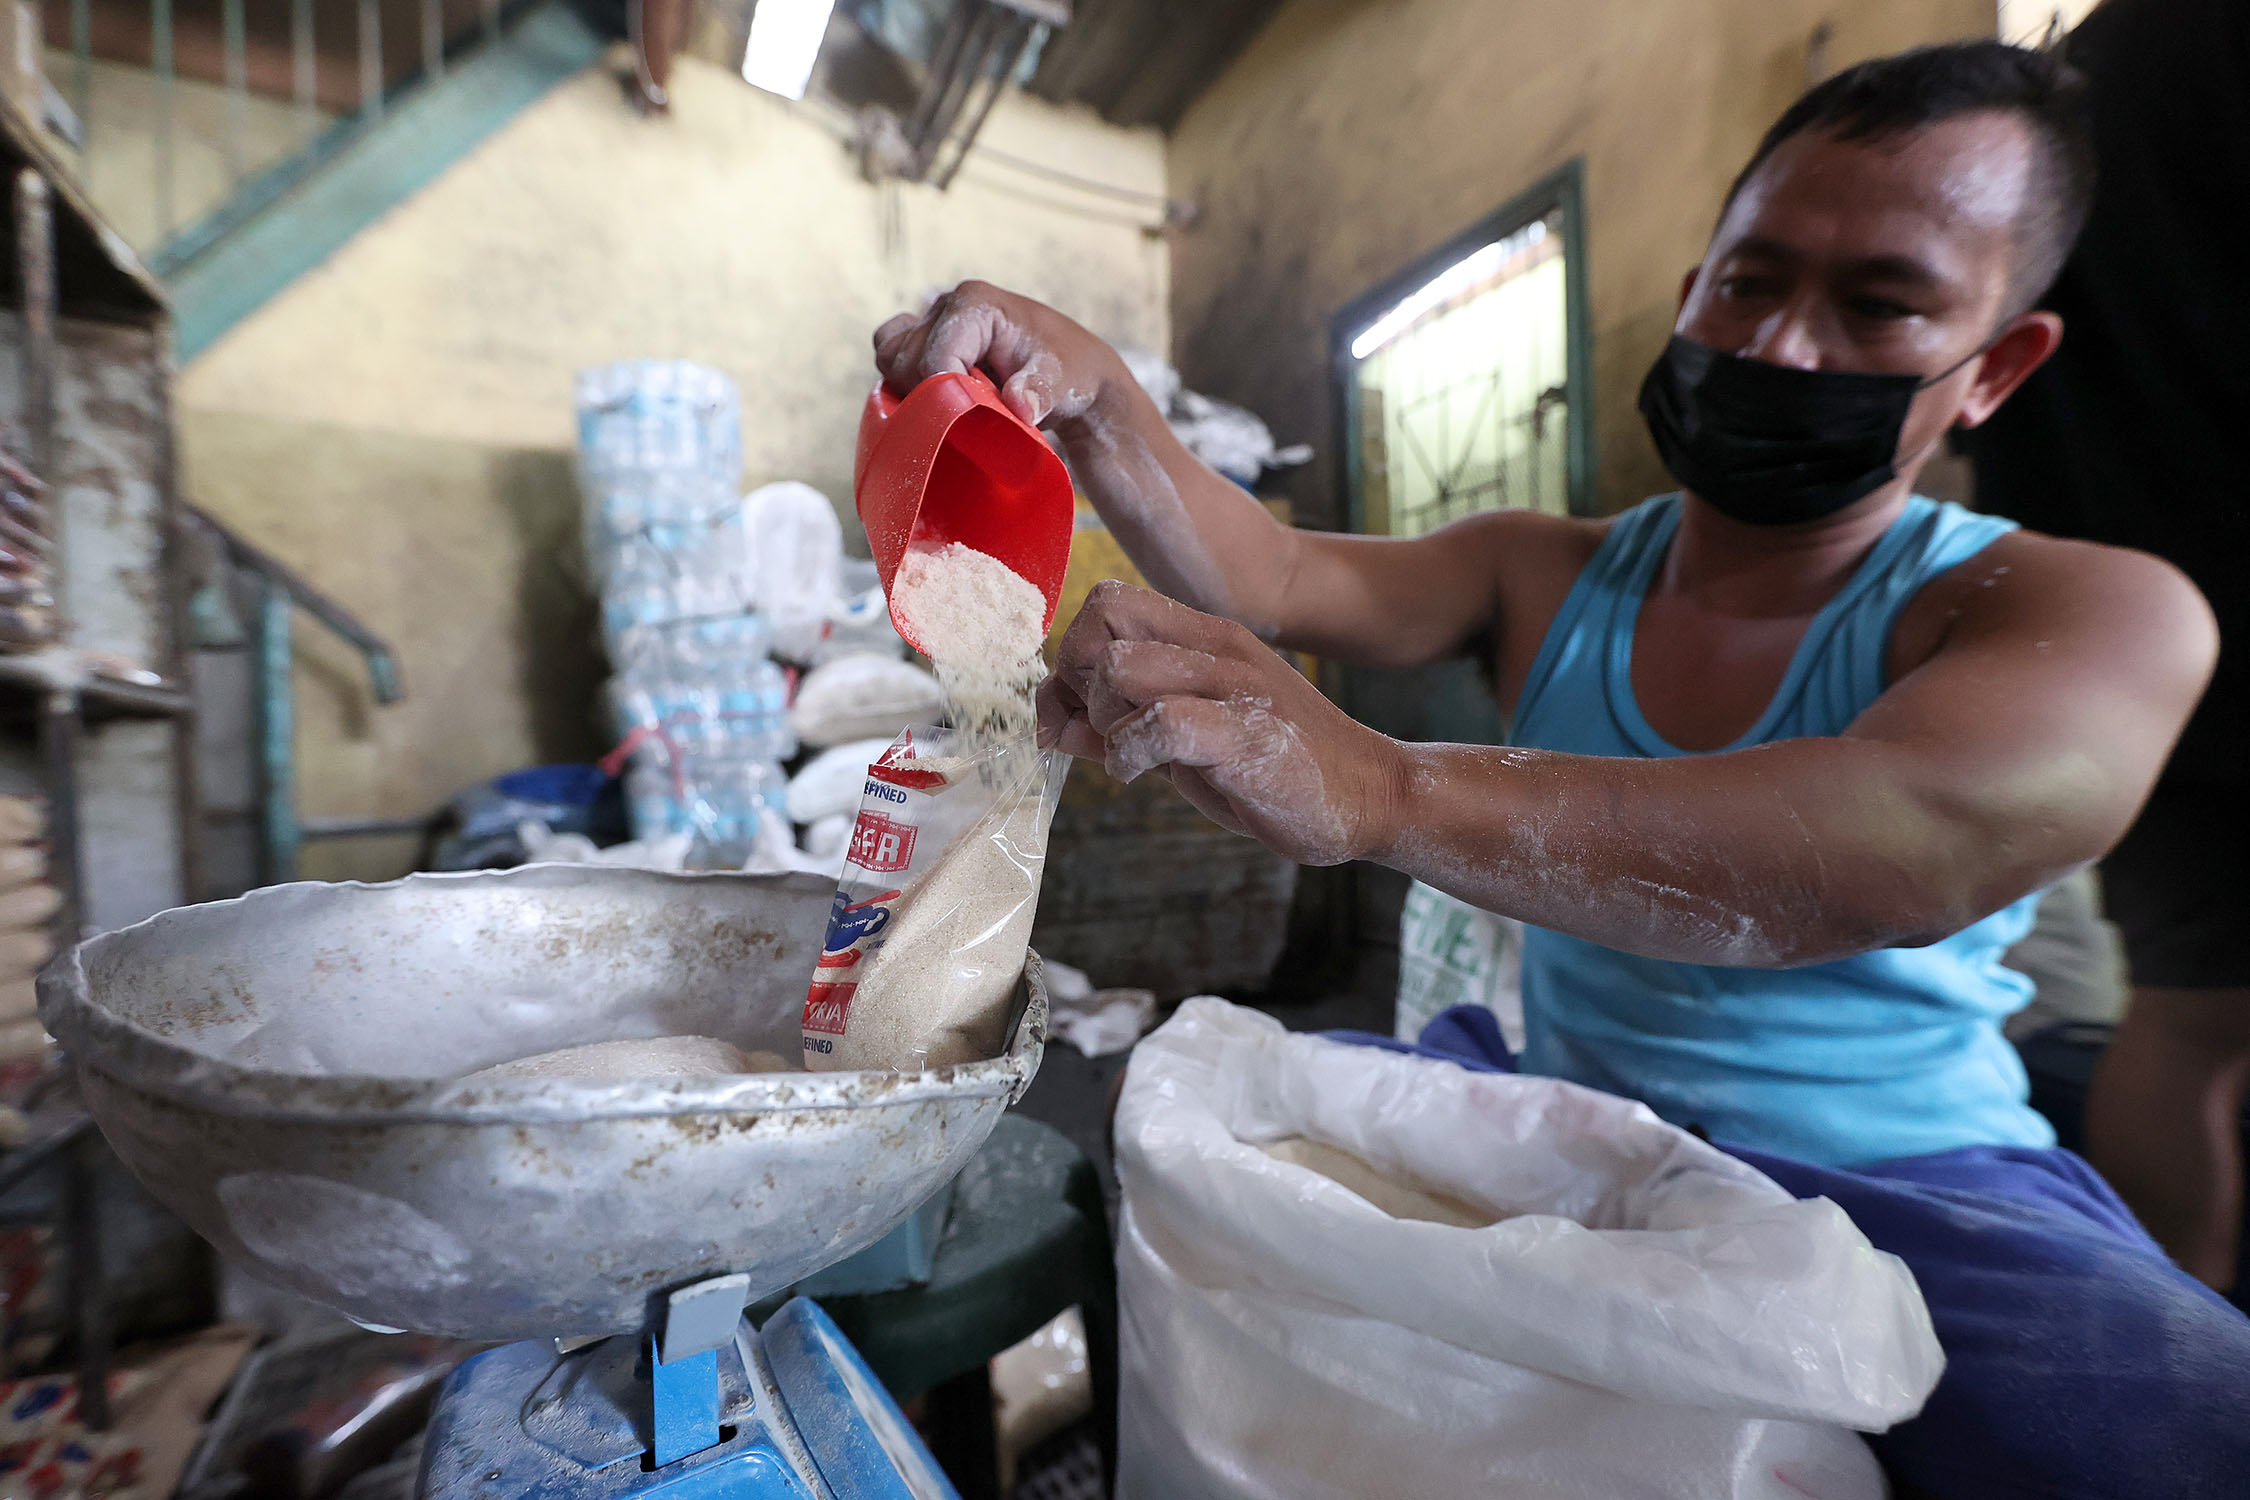 SUGAR SHORTAGE / MAY 27, 2022 Arnel Pongyan, 36, repacks sugar at a stall in Tandang Sora Public Market on Friday, May 27, 2022. The Sugar Regulatory Administration (SRA) said the sugar shortage is brought about by the damaged caused by typhoon Odette in Negros which caused prices to spike. INQUIRER PHOTO / GRIG C. MONTEGRANDE